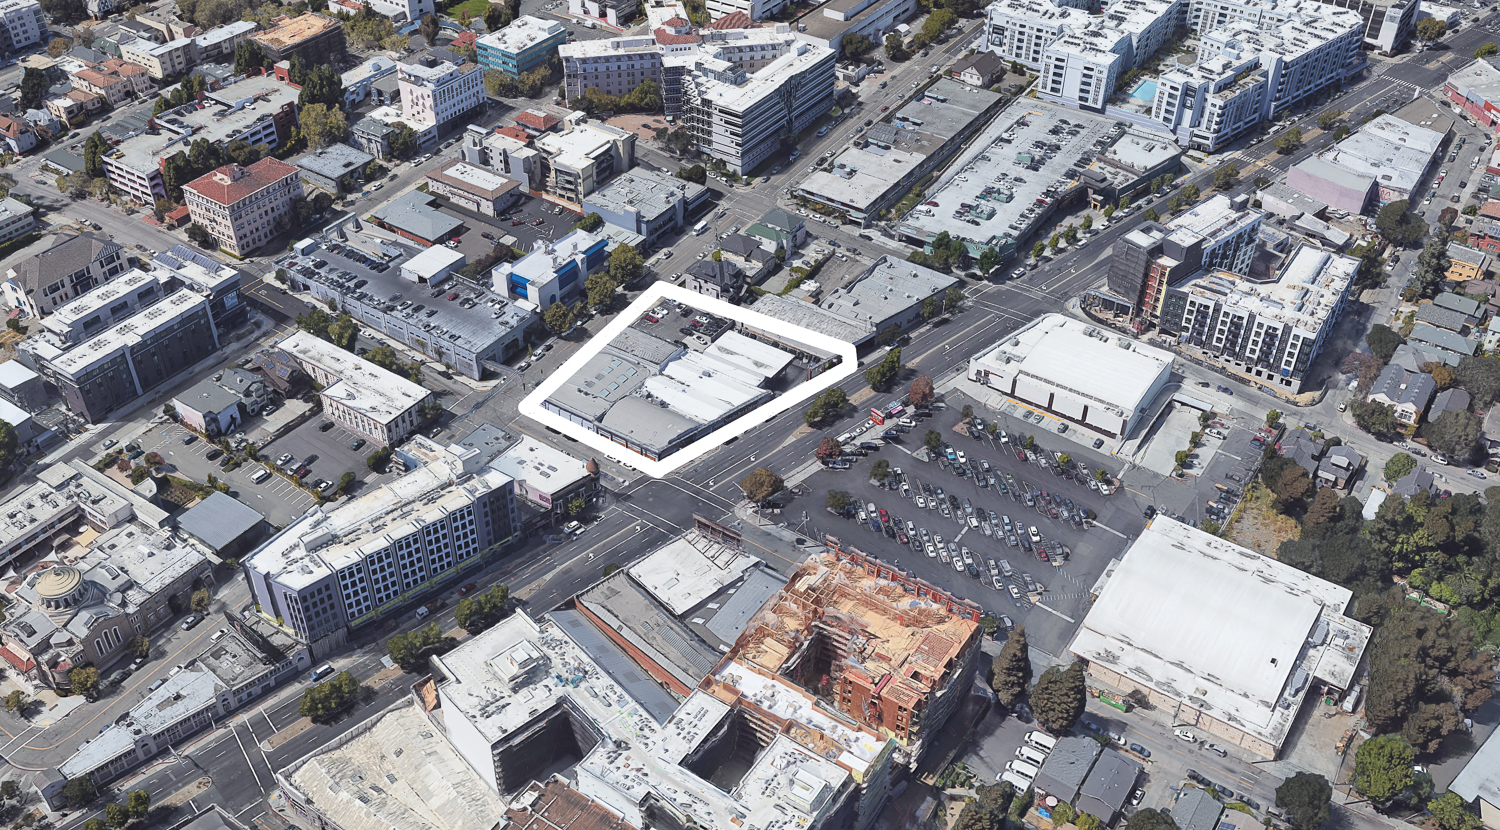 2929 Broadway property site outlined approximately by YIMBY, image via Google Satellite